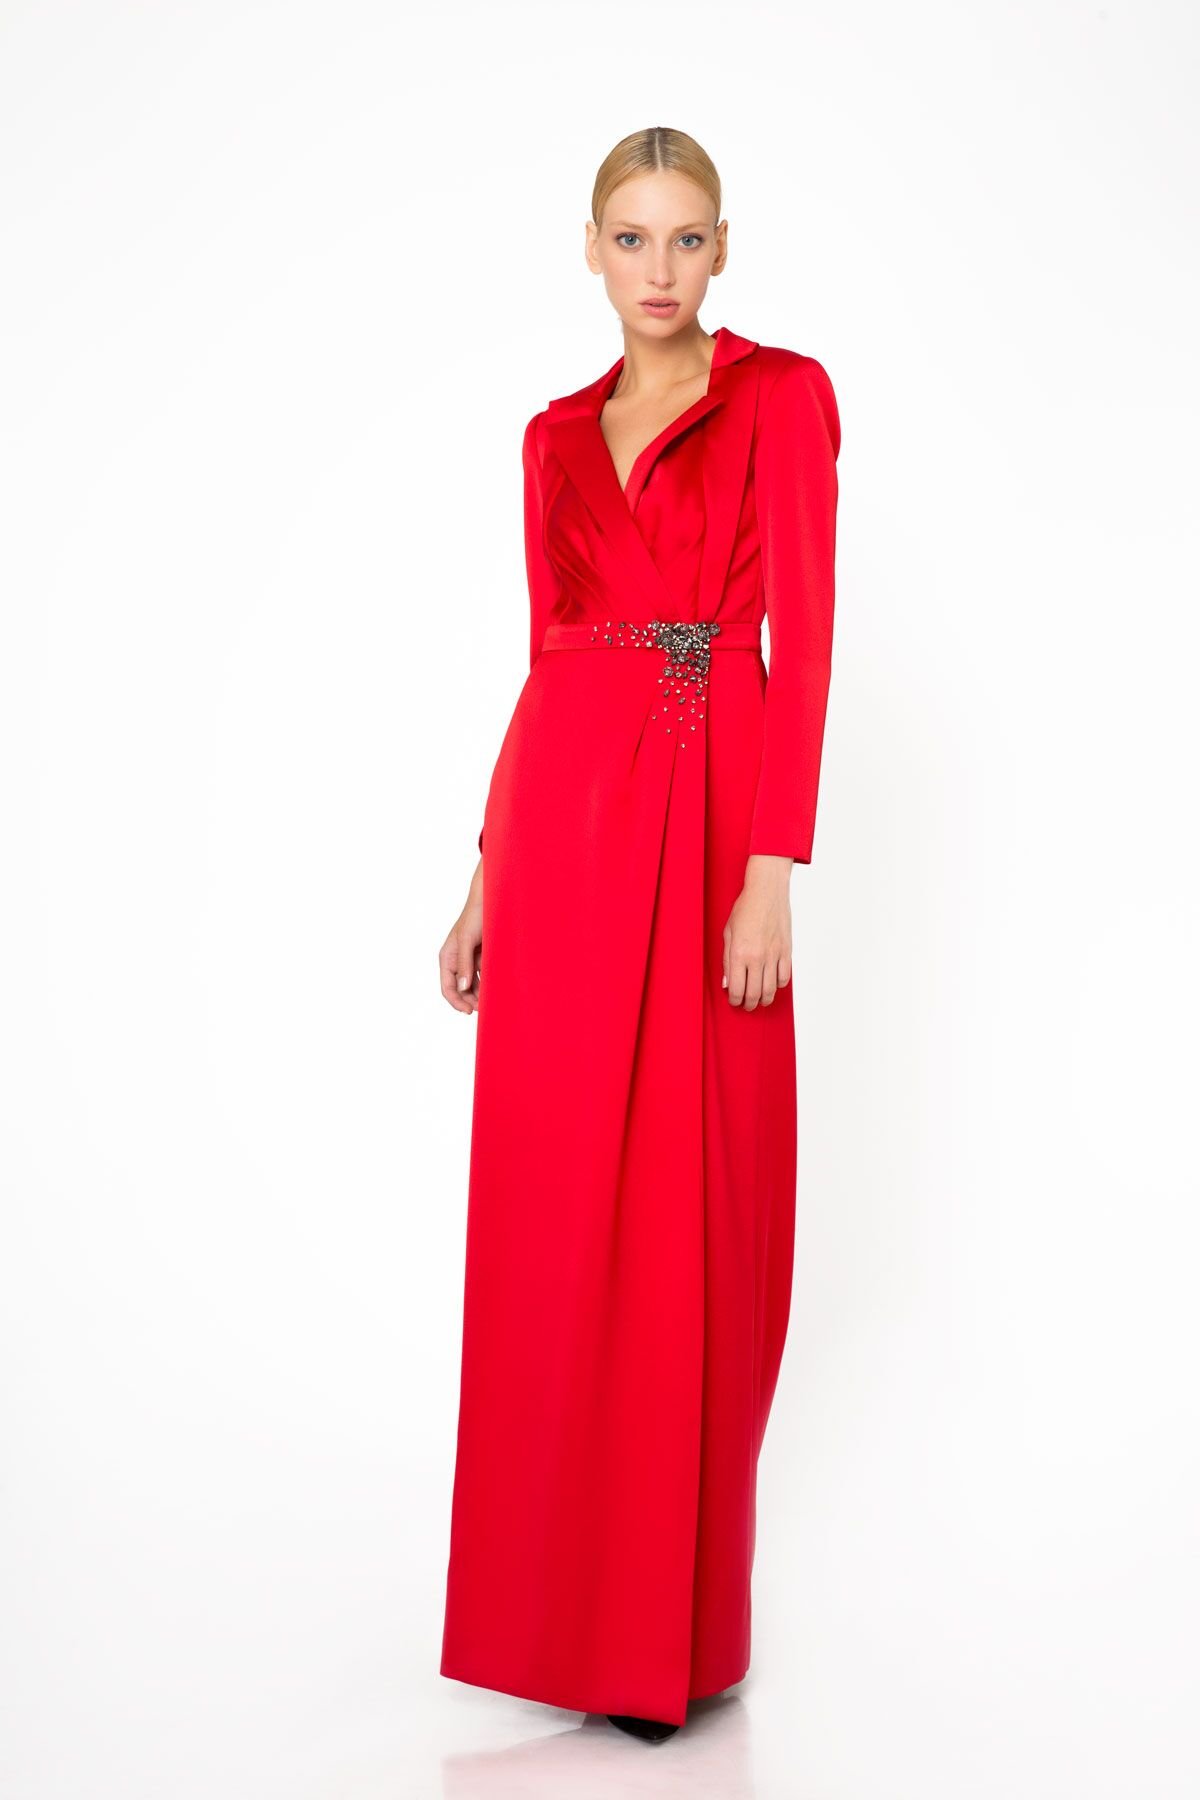 Stone Embroidered Detailed Red Long Evening Dress